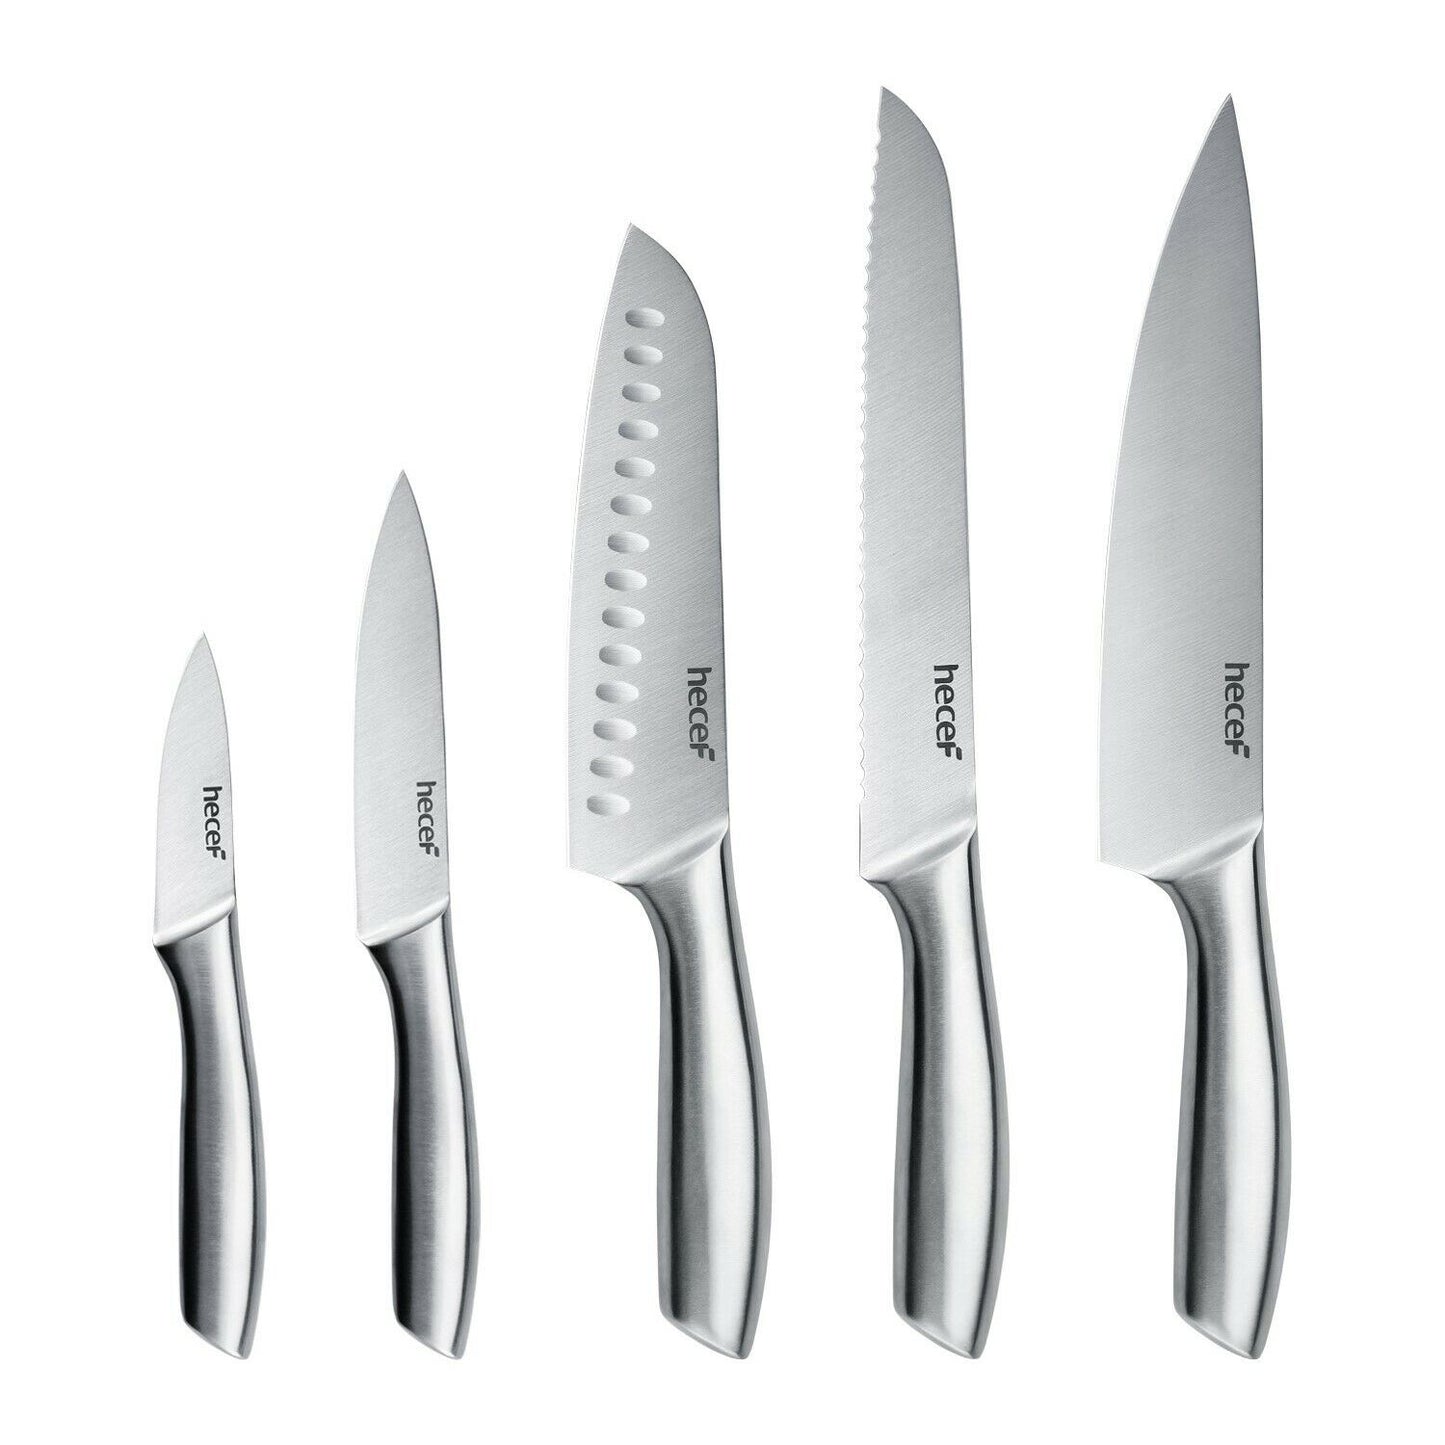 Hecef Silver Kitchen knife set of 5, Satin Finish Blade with Hollow Handle, includes 8" Chef, 8"Bread, 8"Santoku, 5"Utility and 3.5"paring knife - Hecef Kitchen